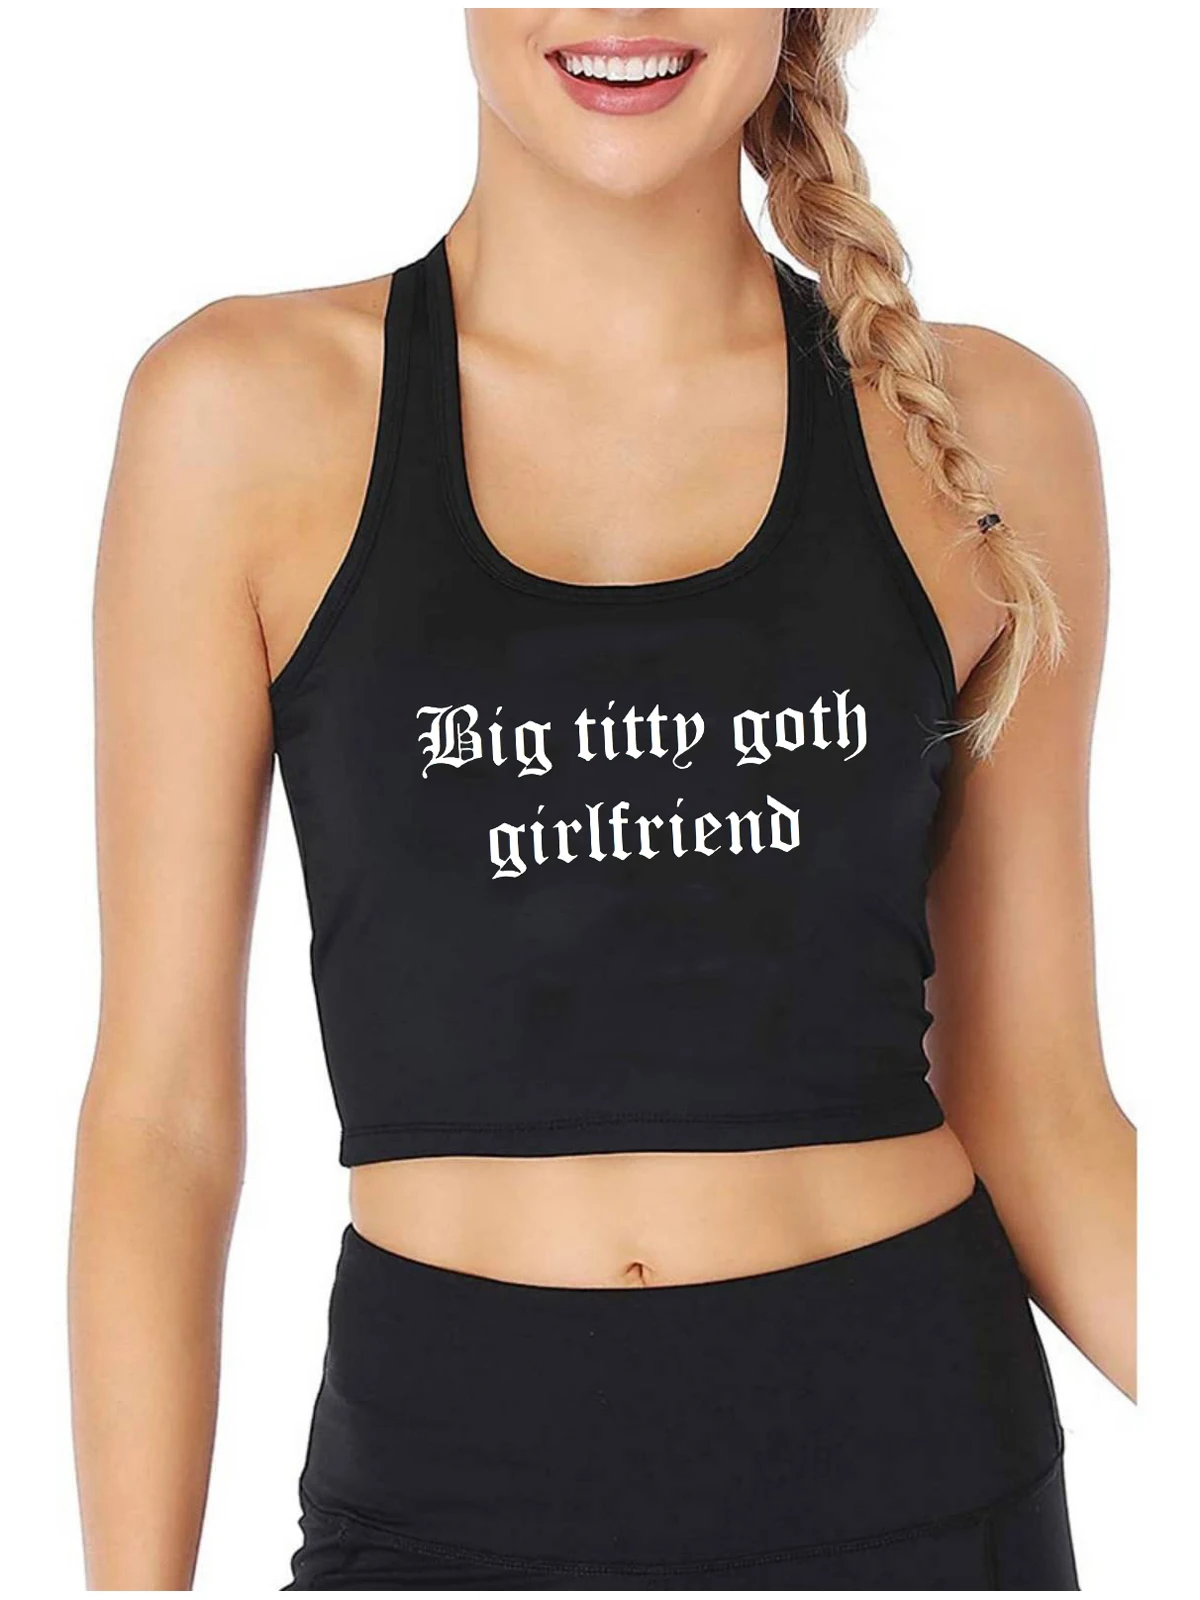 Big Titty Goth Girlfriend Cotton Sexy Slim Fit Crop Top Adult Humor Flirtatious Style Tank Tops Funny Sports Training Camisole